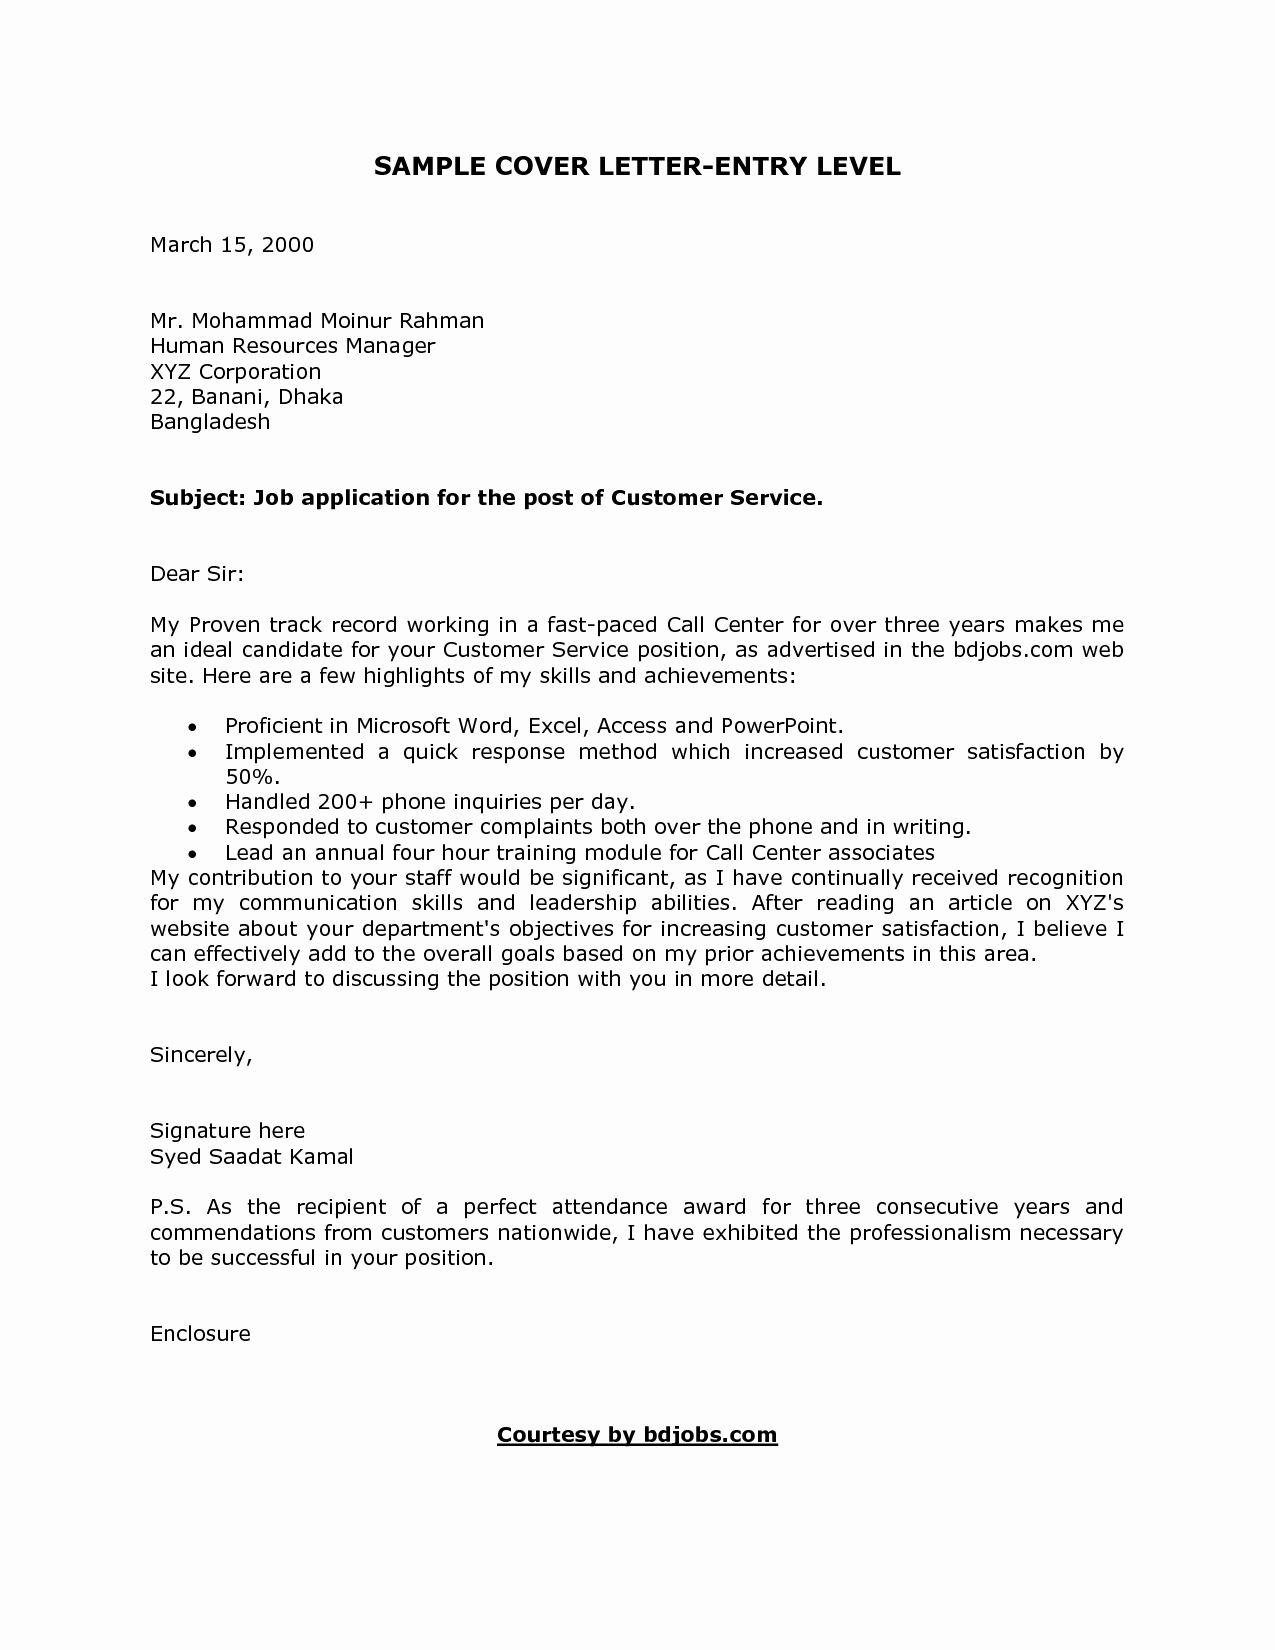 Sample Entry Level Cover Letters Awesome Cover Letter format Creating An Executive Cover Letter